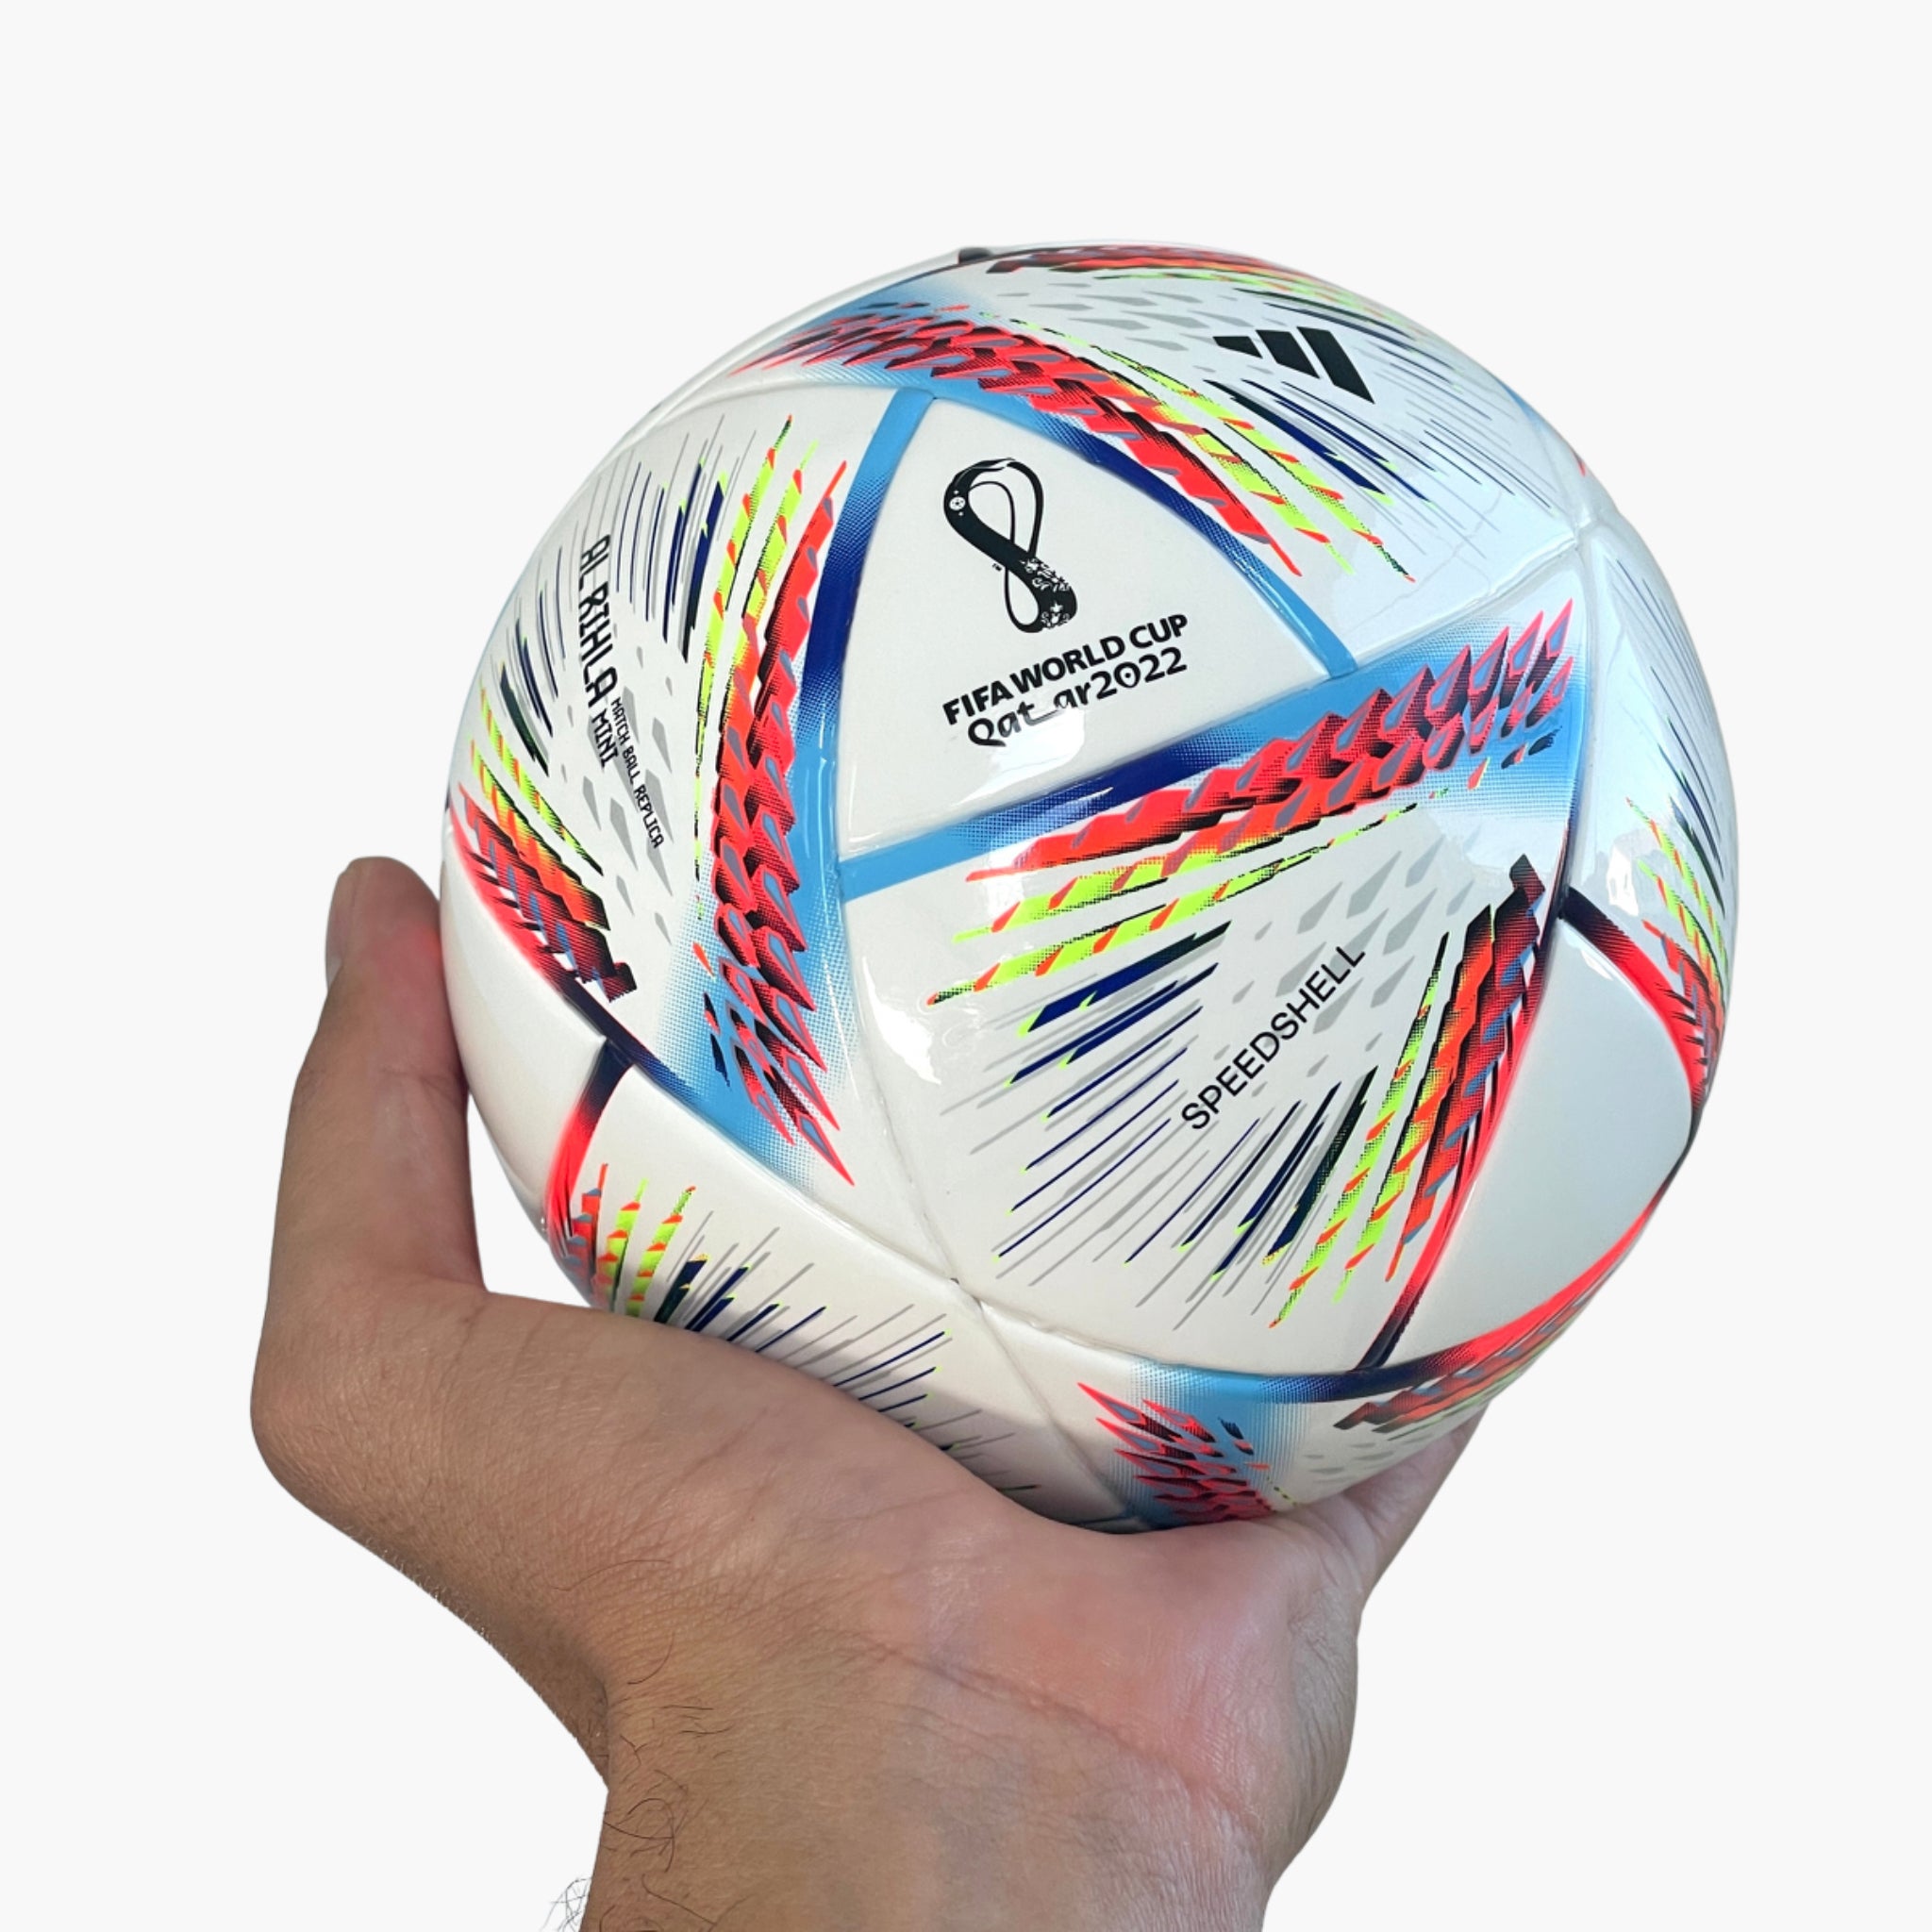 A New Match Ball Will Replace Al Rihla For FIFA World Cup 2022 Finals: All  You Need to Know - News18